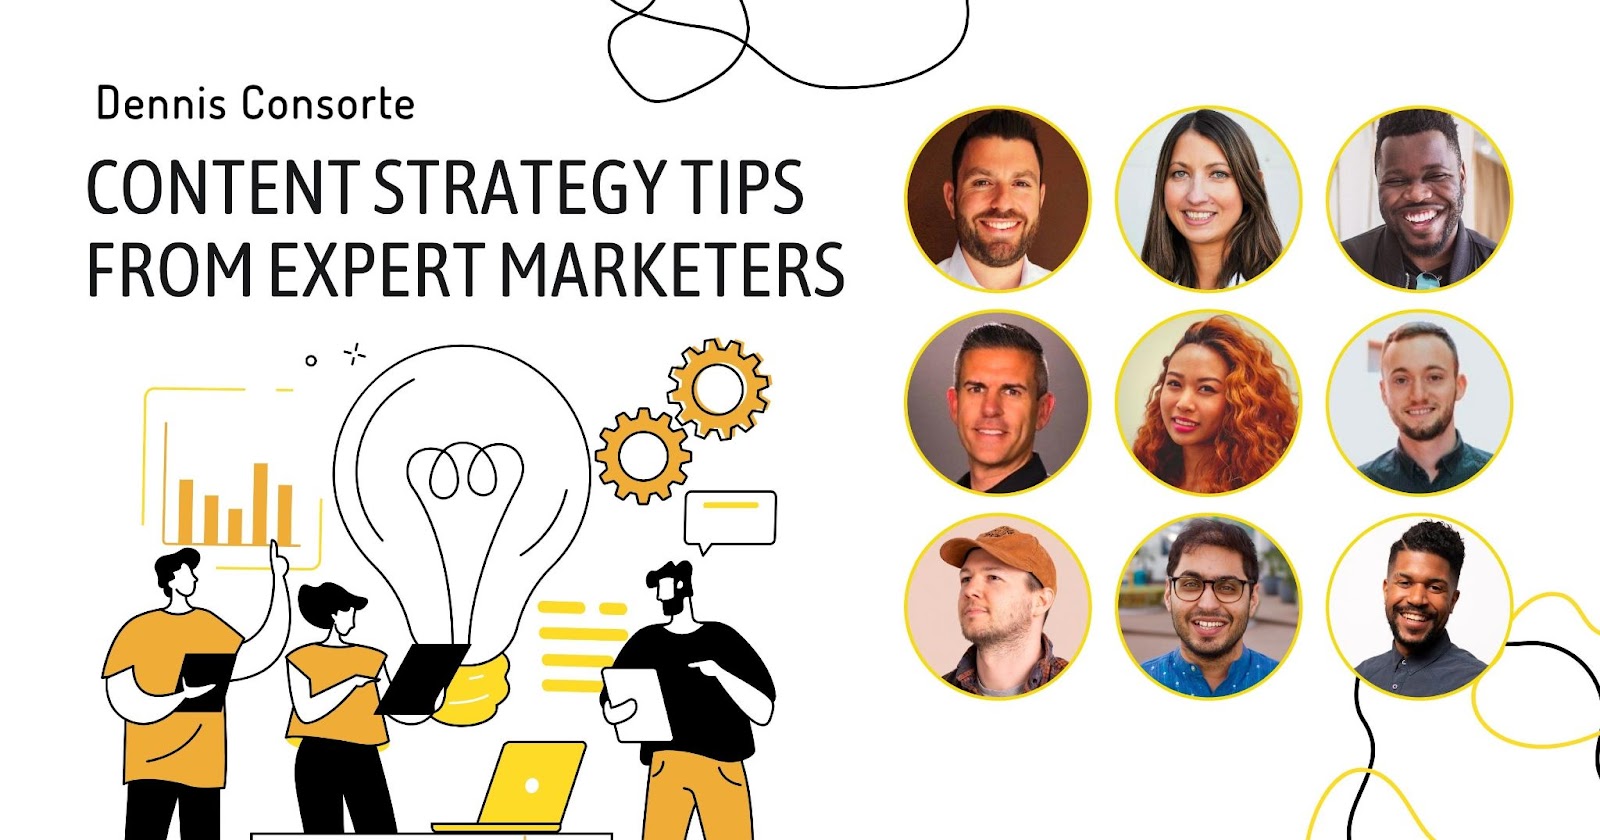 Content Strategy Tips from Expert Marketers